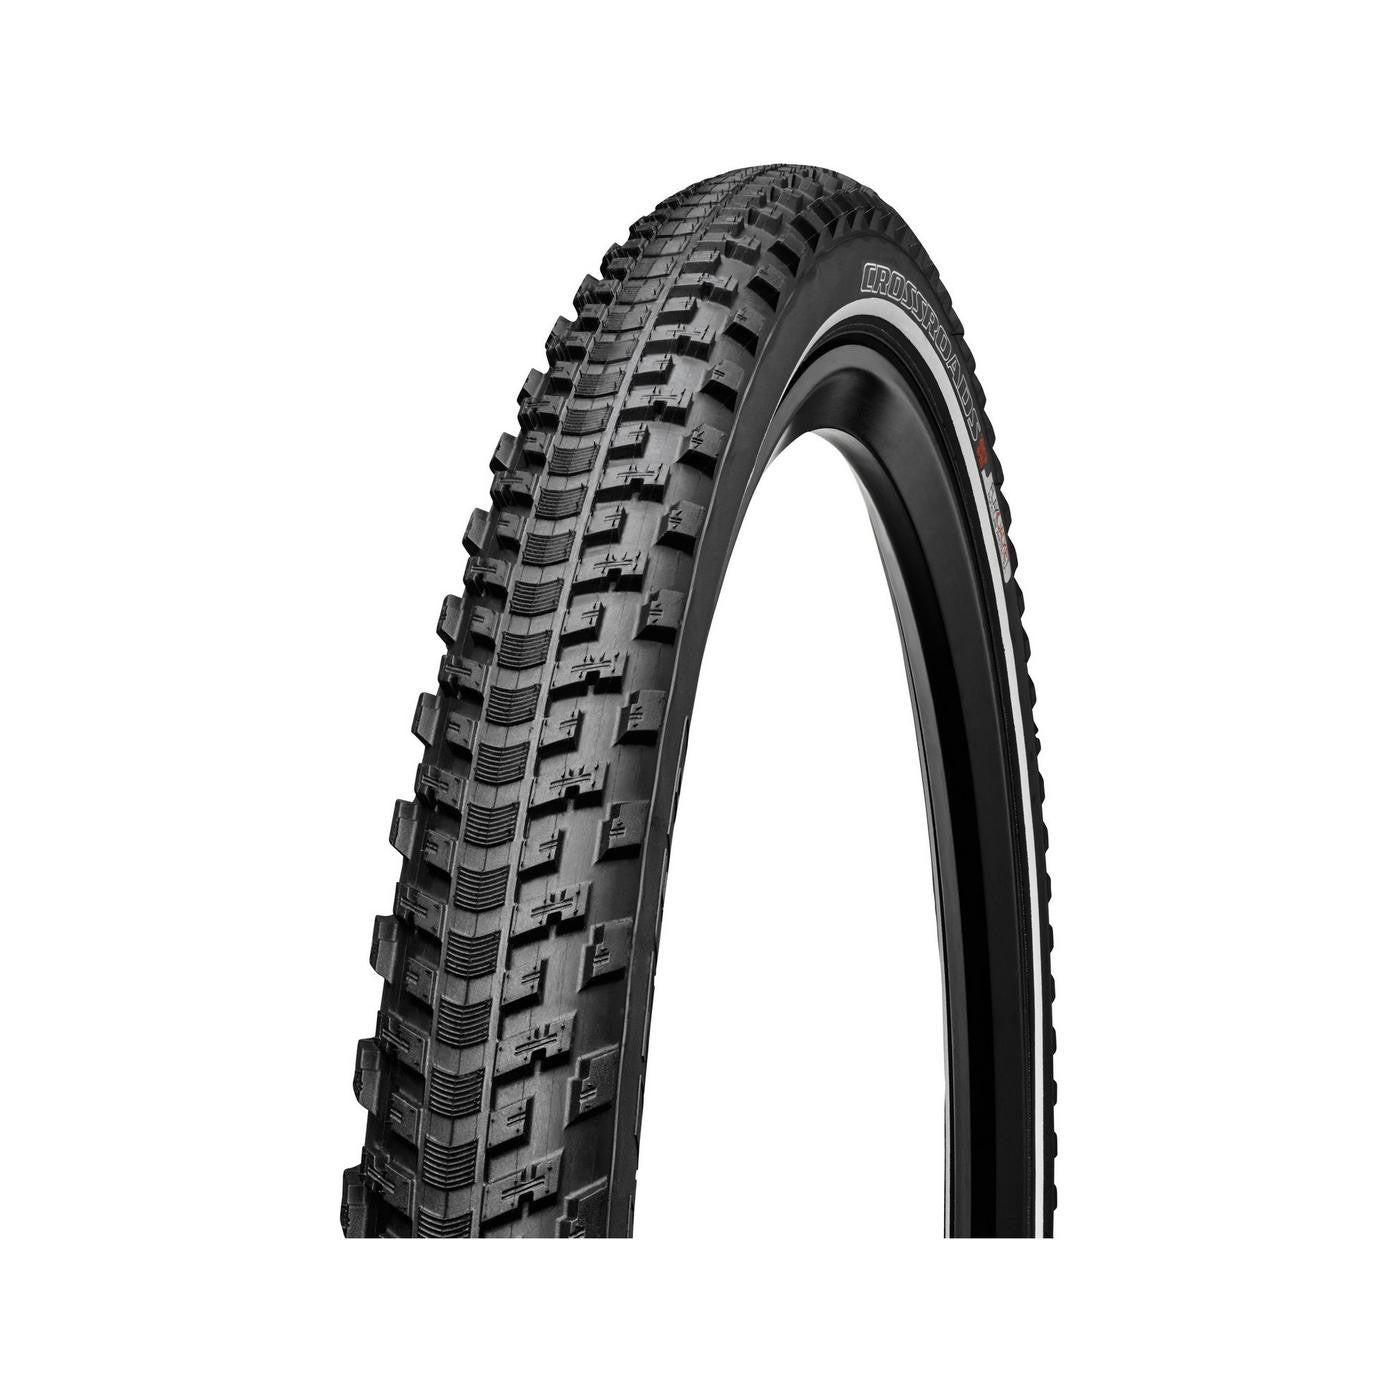 Specialized Crossroads Armadillo Reflect 29" Bike tire - Tires - Bicycle Warehouse